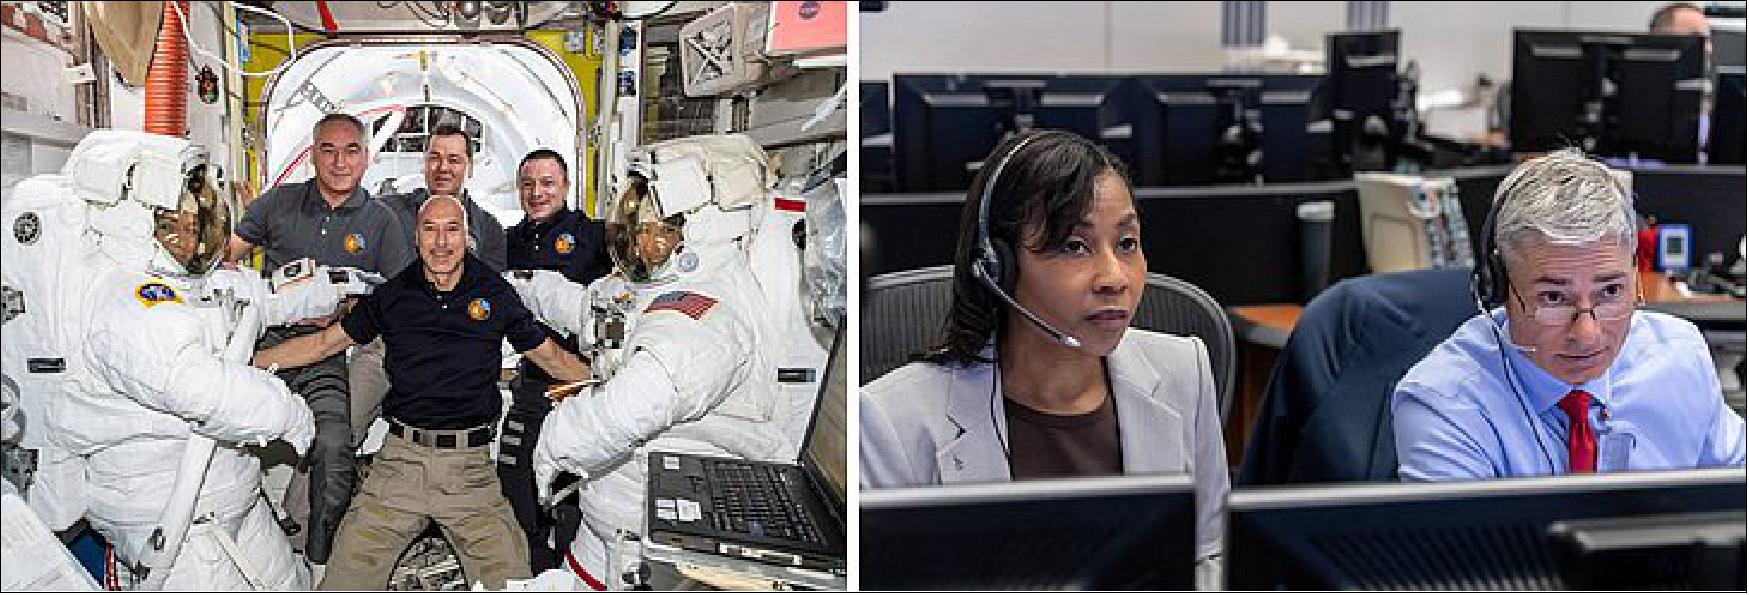 Figure 103: Left: Space suited astronauts Meir (at left) and Koch, assisted by their Expedition 61 crewmates, prepare for the first all-woman EVA. Right: CAPCOMs Wilson (at left) and Vande Hei assist Meir and Koch during the first all-woman EVA (image credit: NASA/JSC)